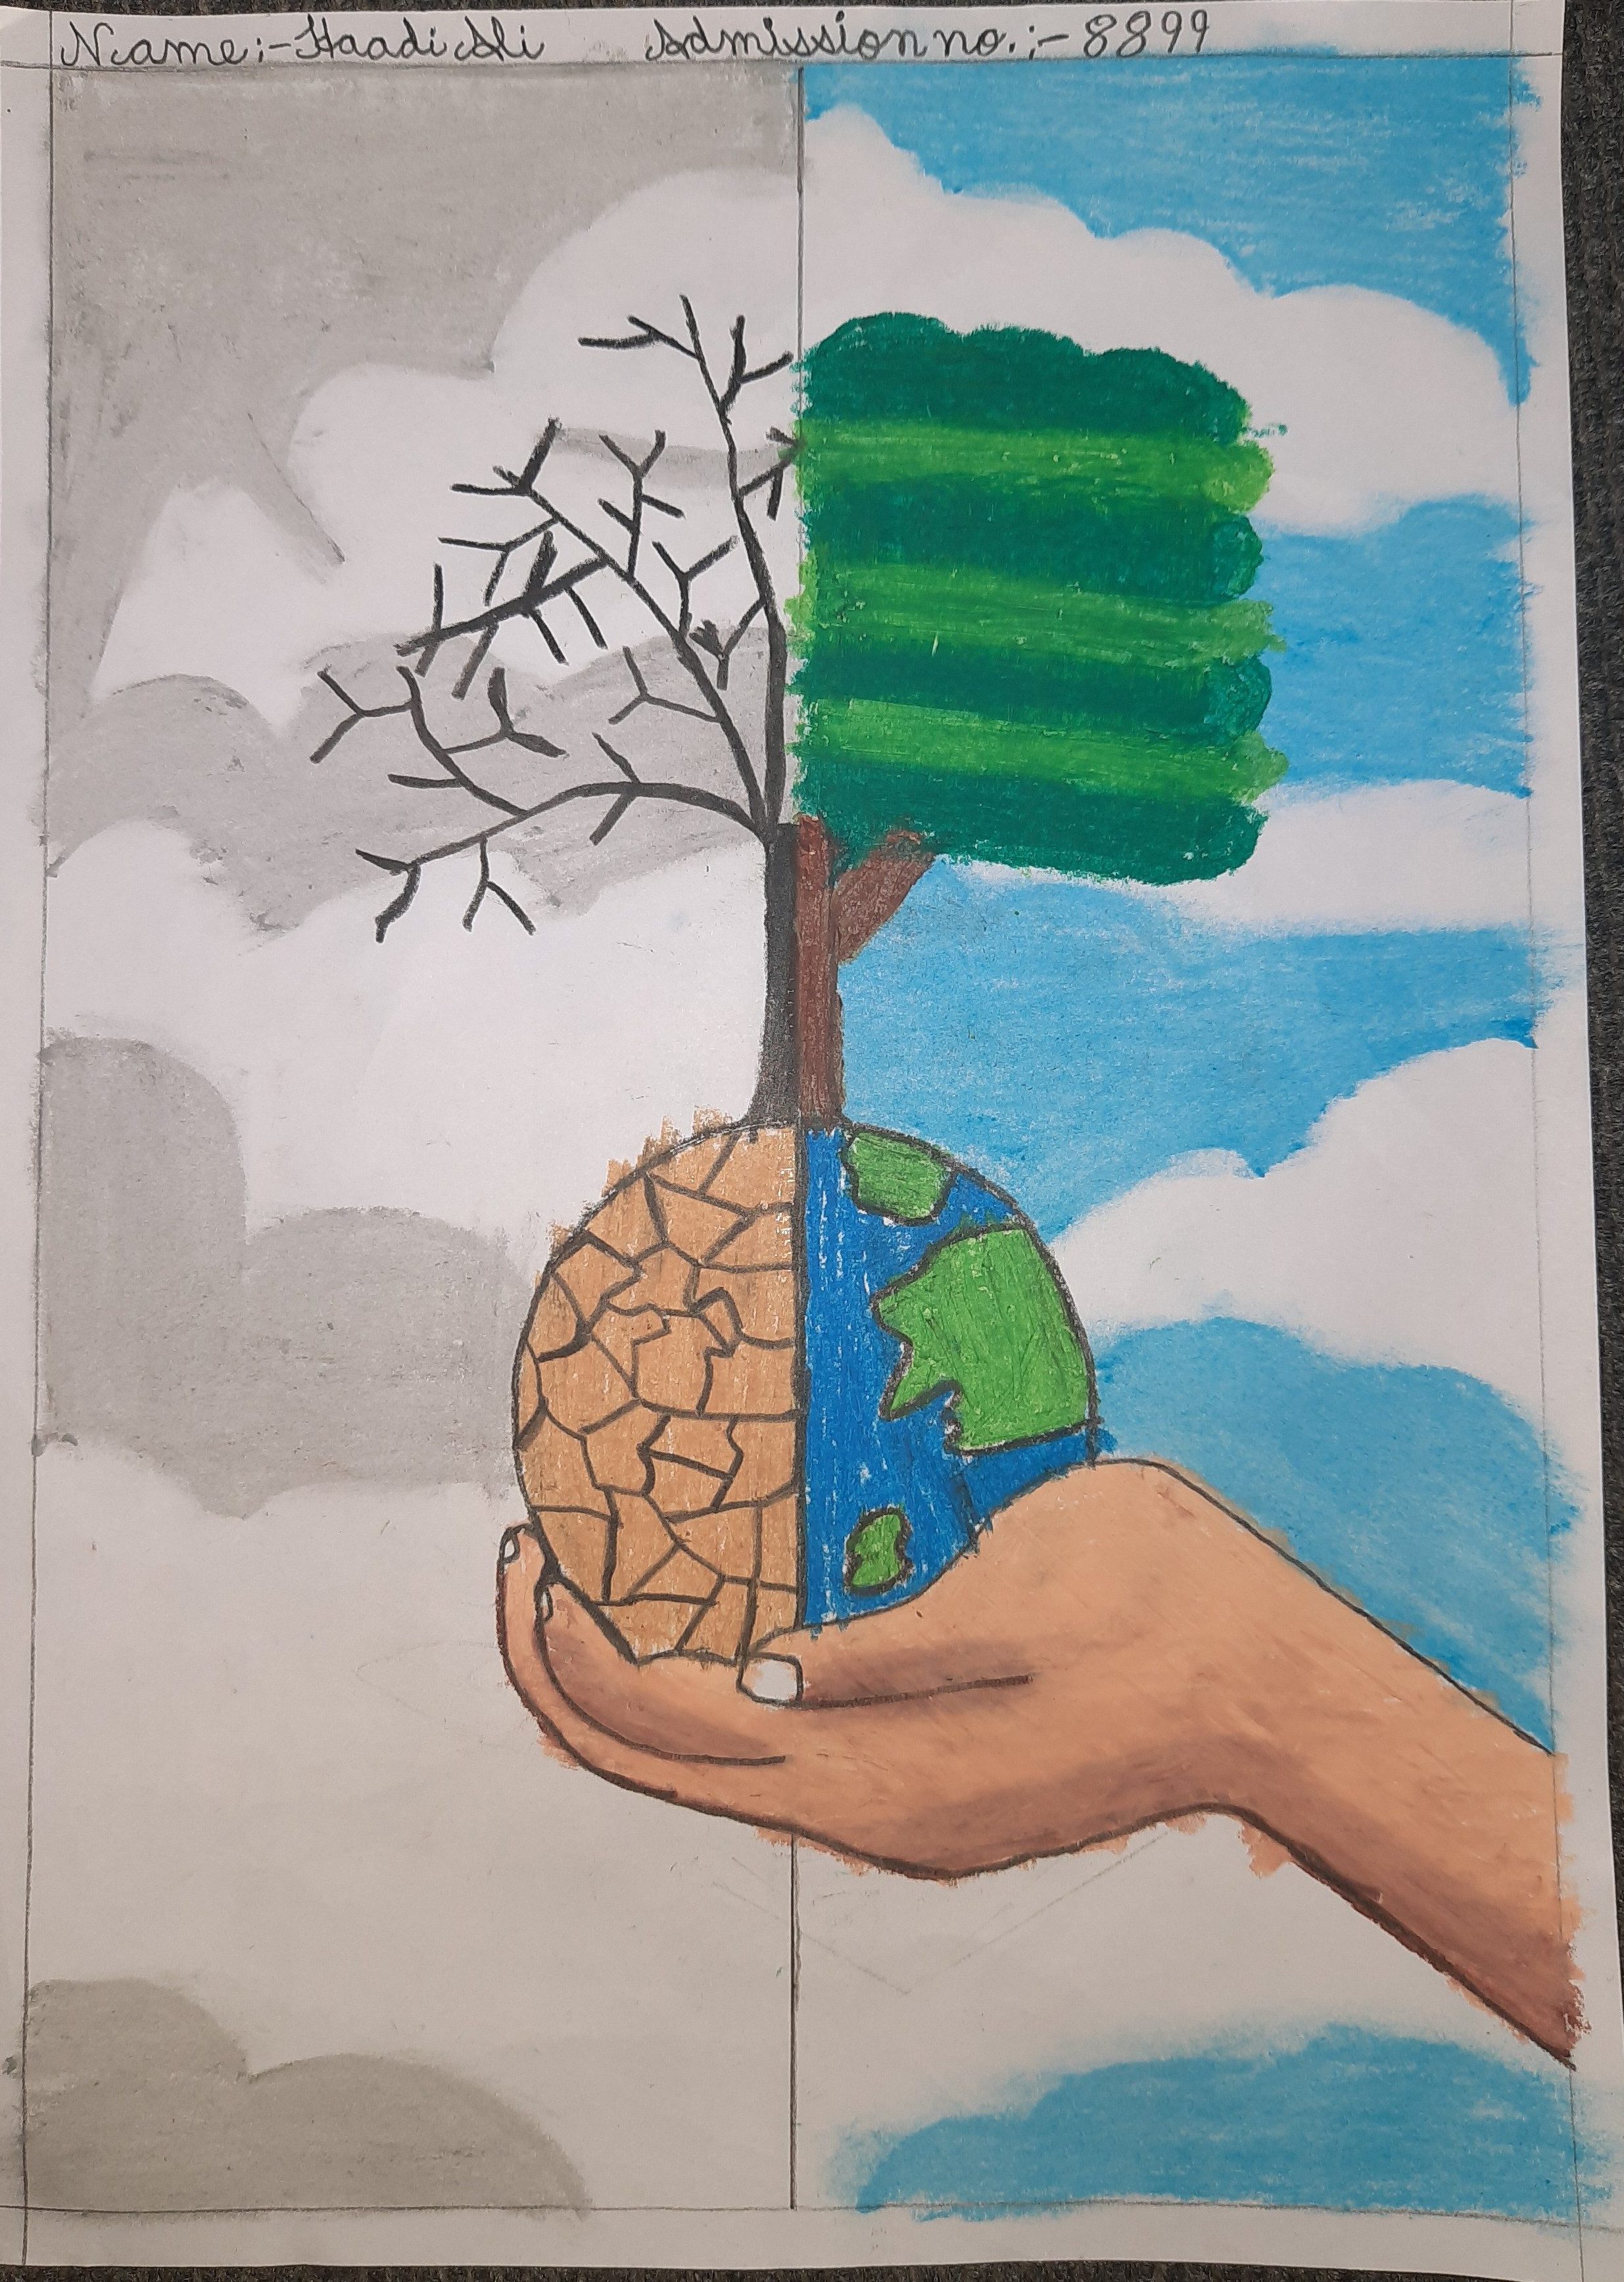 Our Environment | Poster on pollution, Poster drawing, Save mother earth